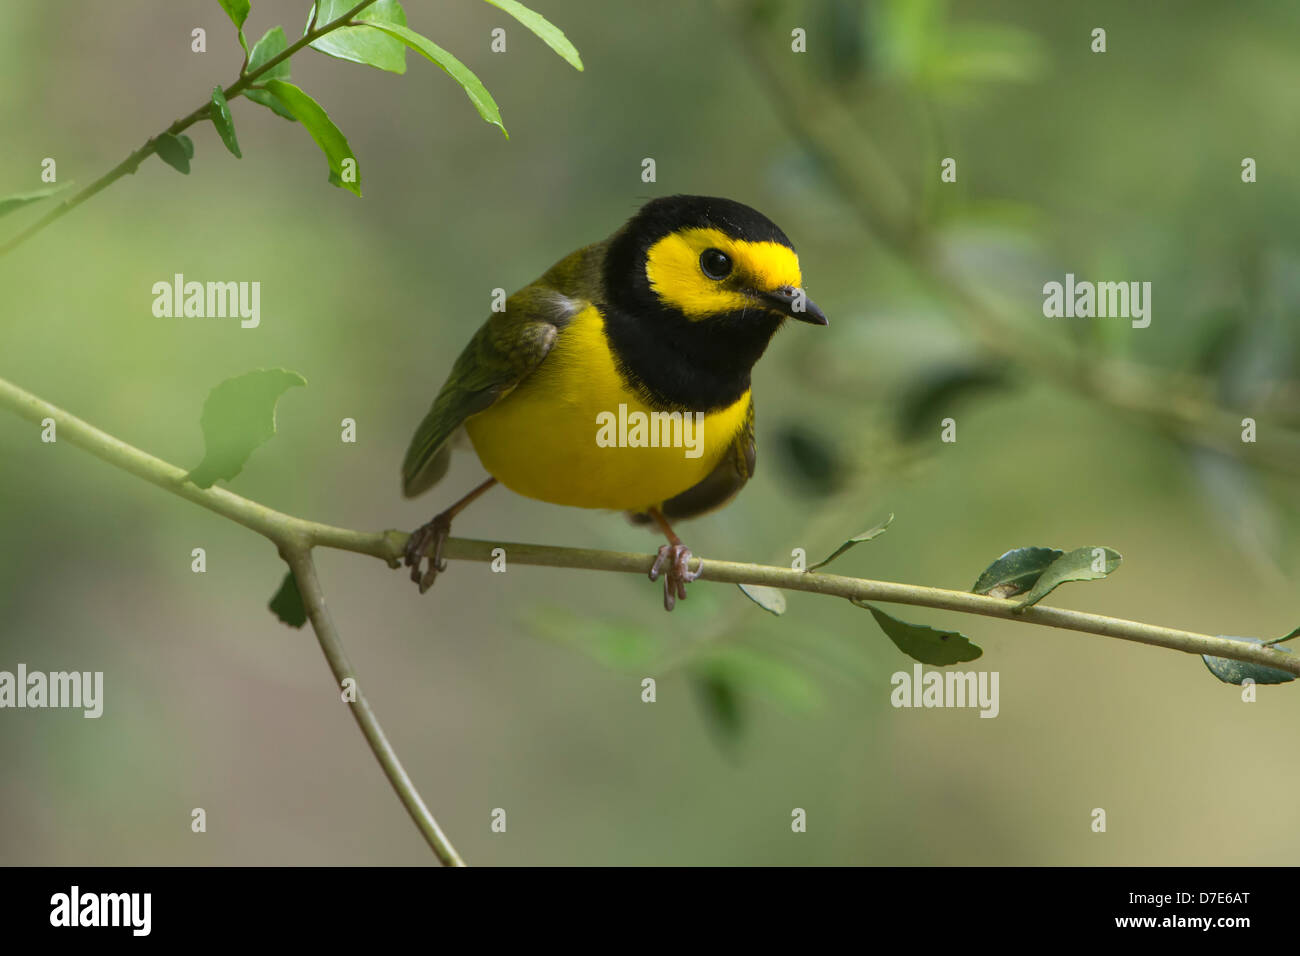 A male hooded warbler (Wilsonia citrina) perched on a branch, High Island, Texas Stock Photo